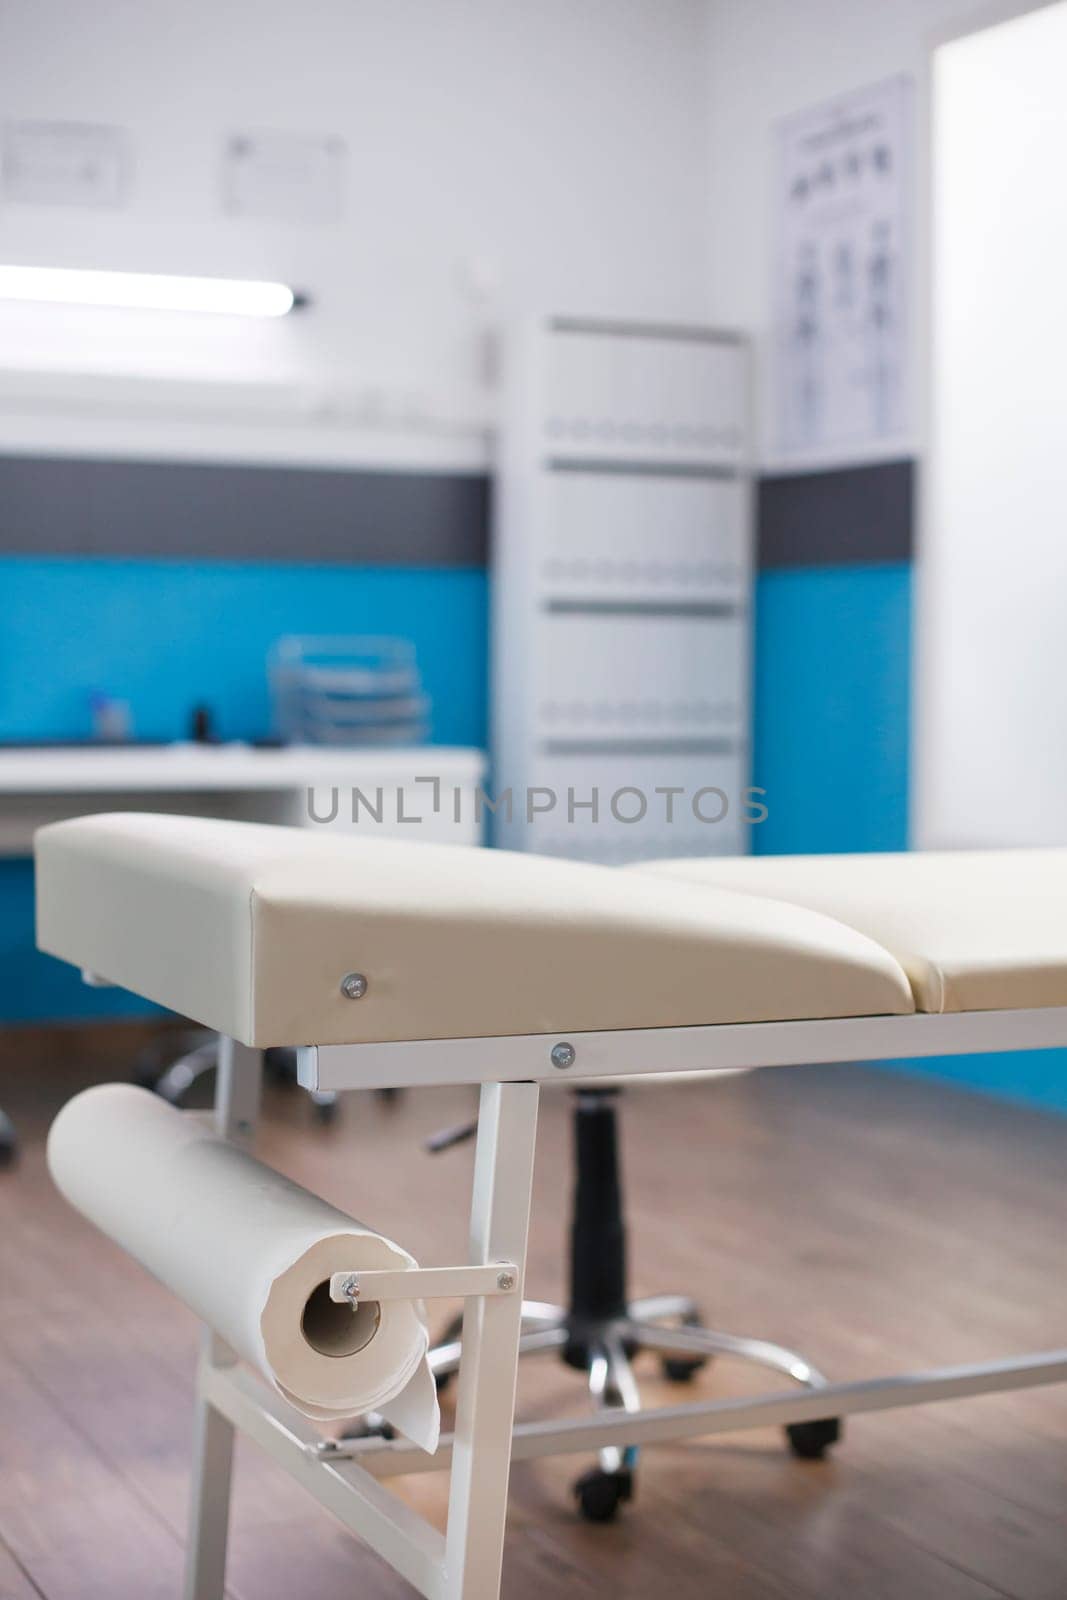 Close-up shot of an empty examination bed in a hospital room. The detailed image showcases a clinic office where patients may make appointments and get consultations.